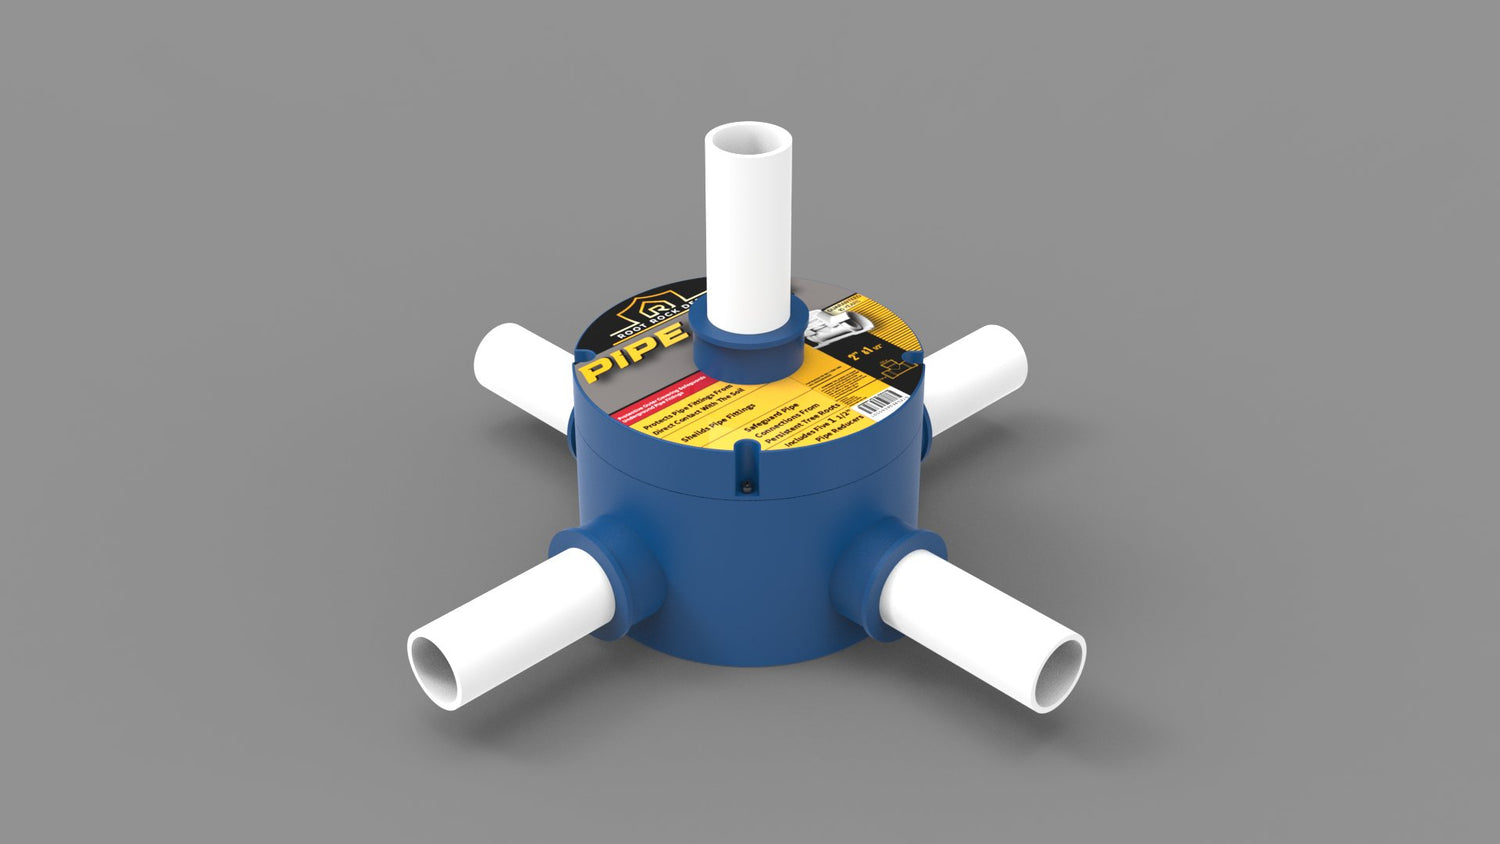 This Pipe Box offers a dependable and efficient solution for all your plumbing projects.